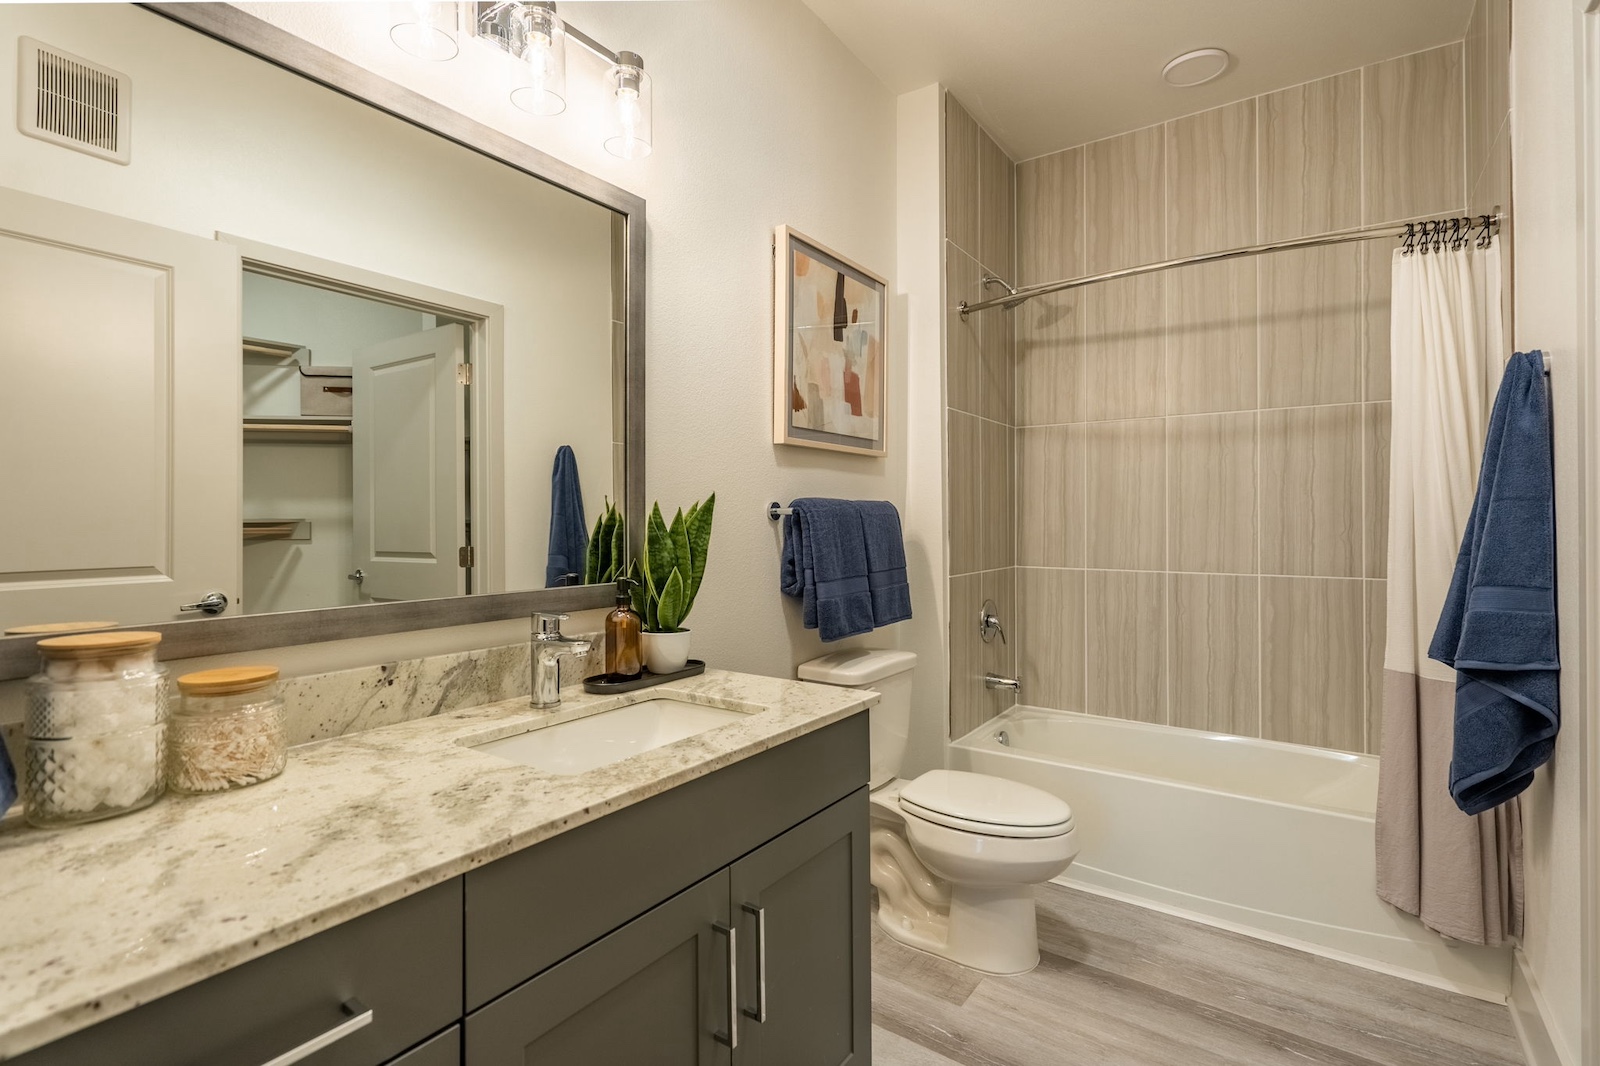 Bathroom with granite countertops and modern tile at our Cypress, TX apartments for rent.